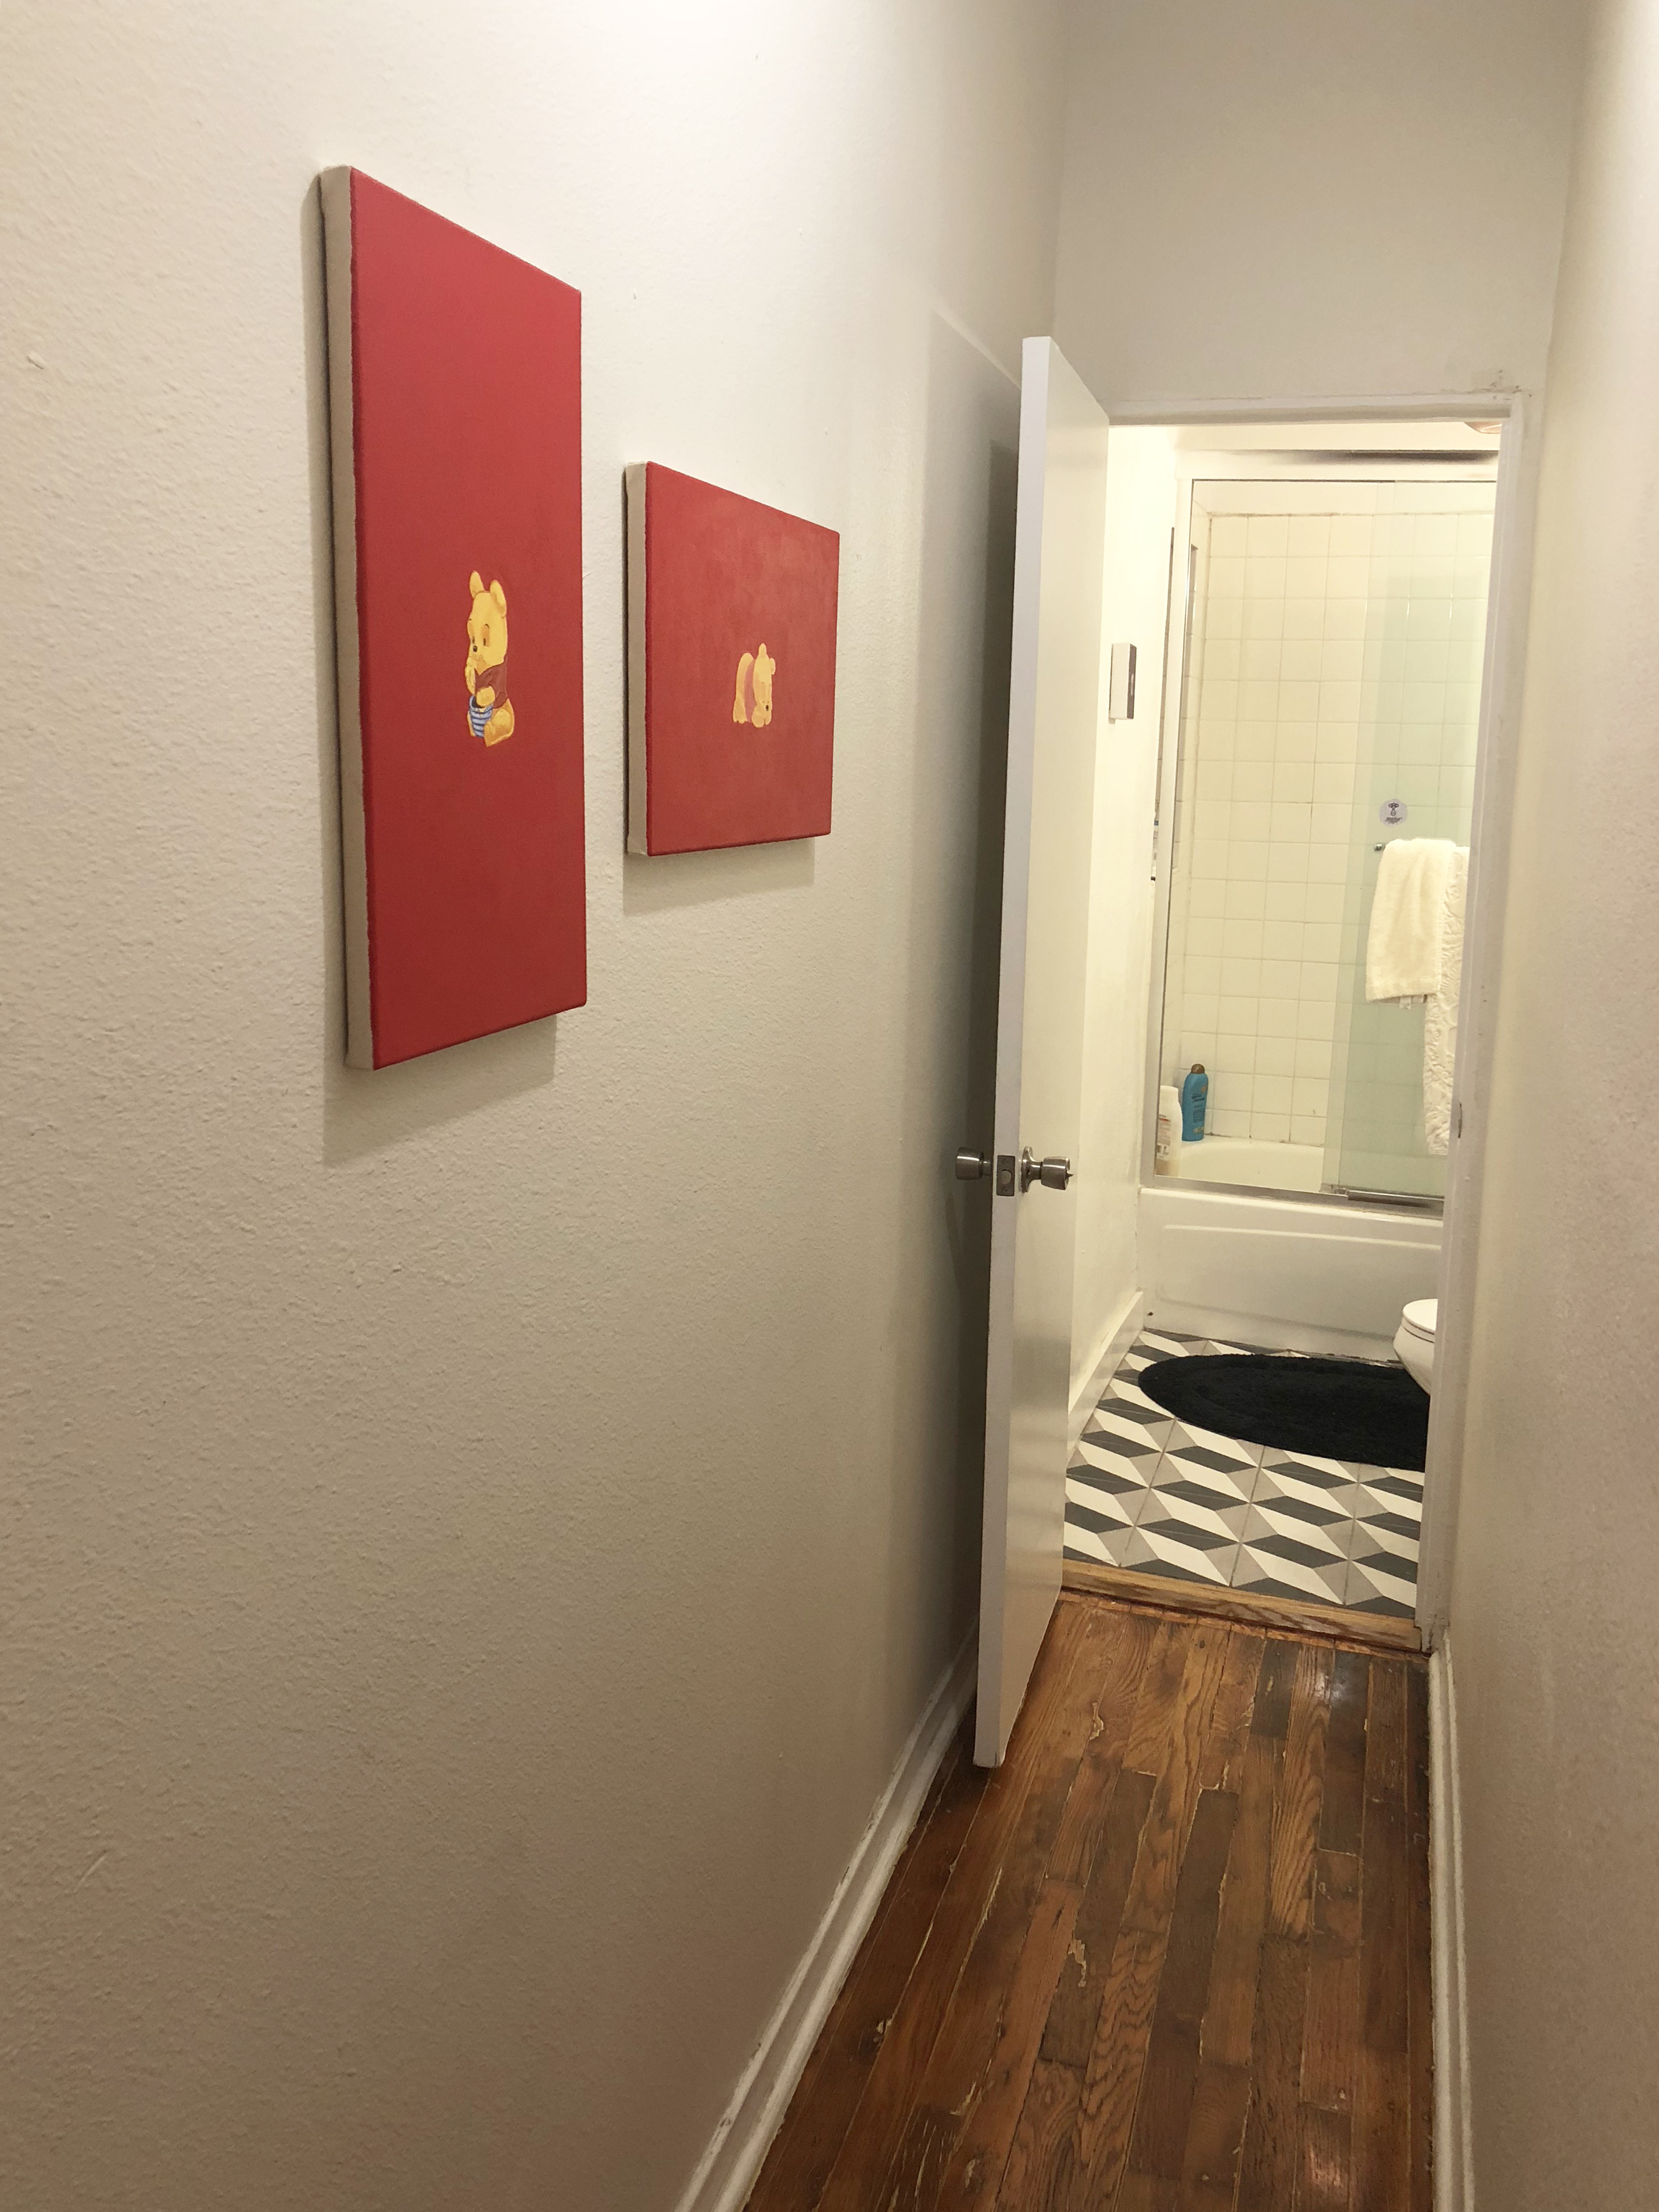 Two red paintings hung on a white wall in a narrow hallway